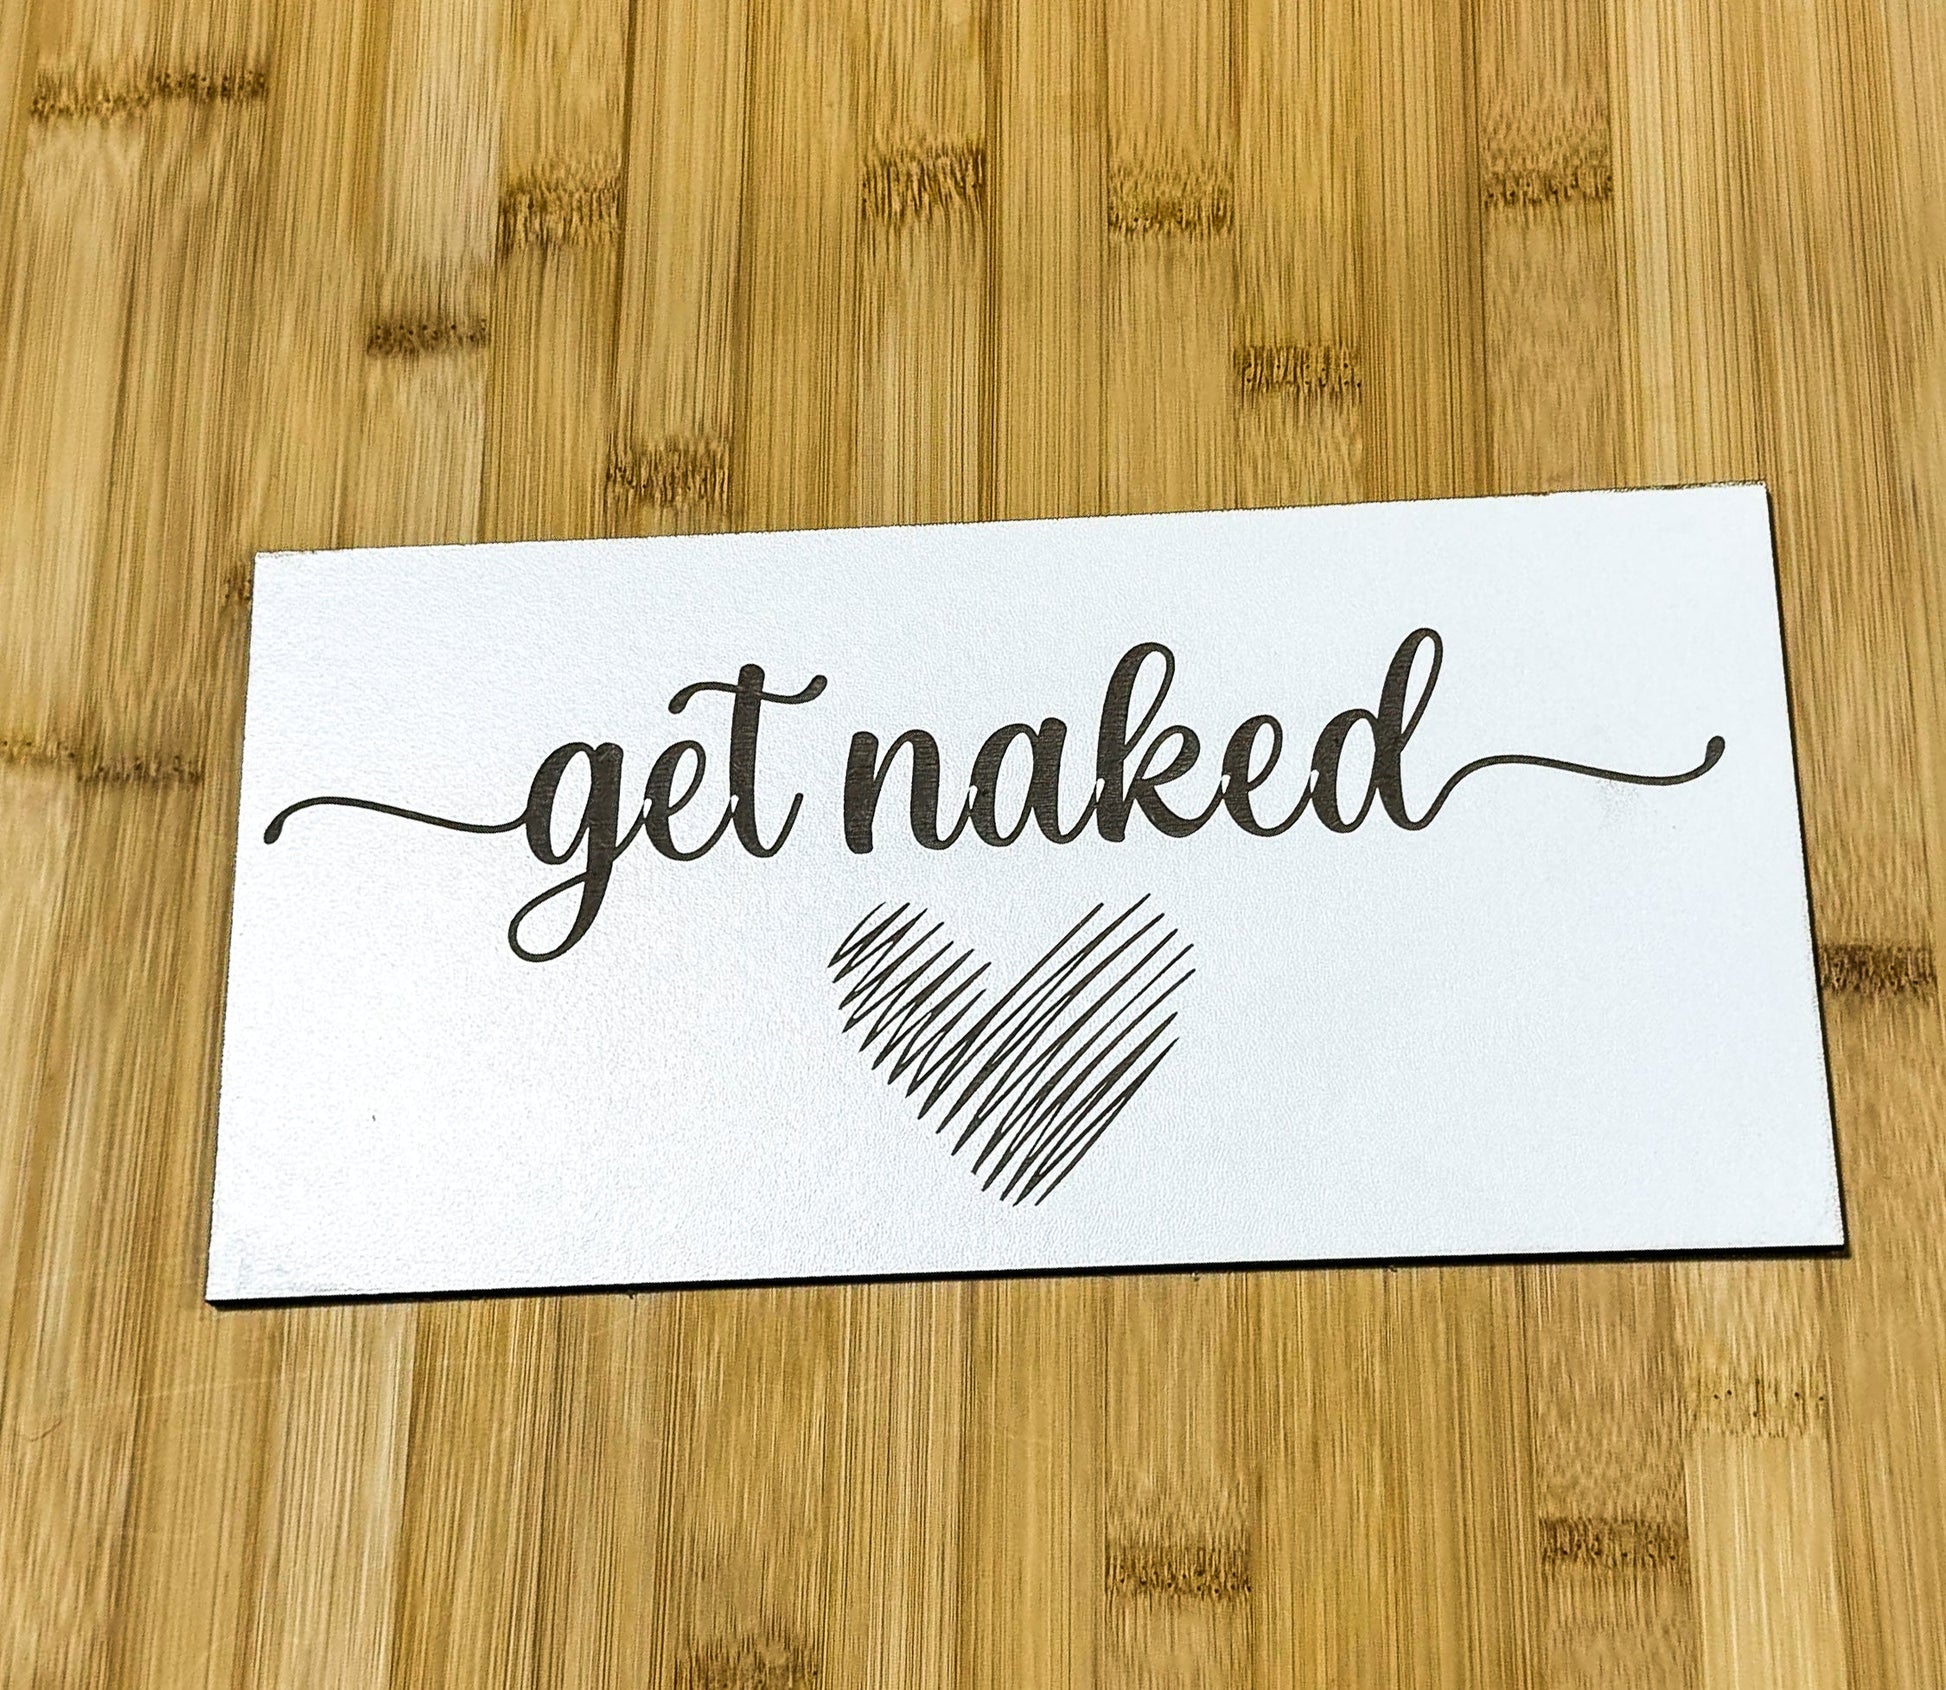 a sticker that says get naked on a wooden surface